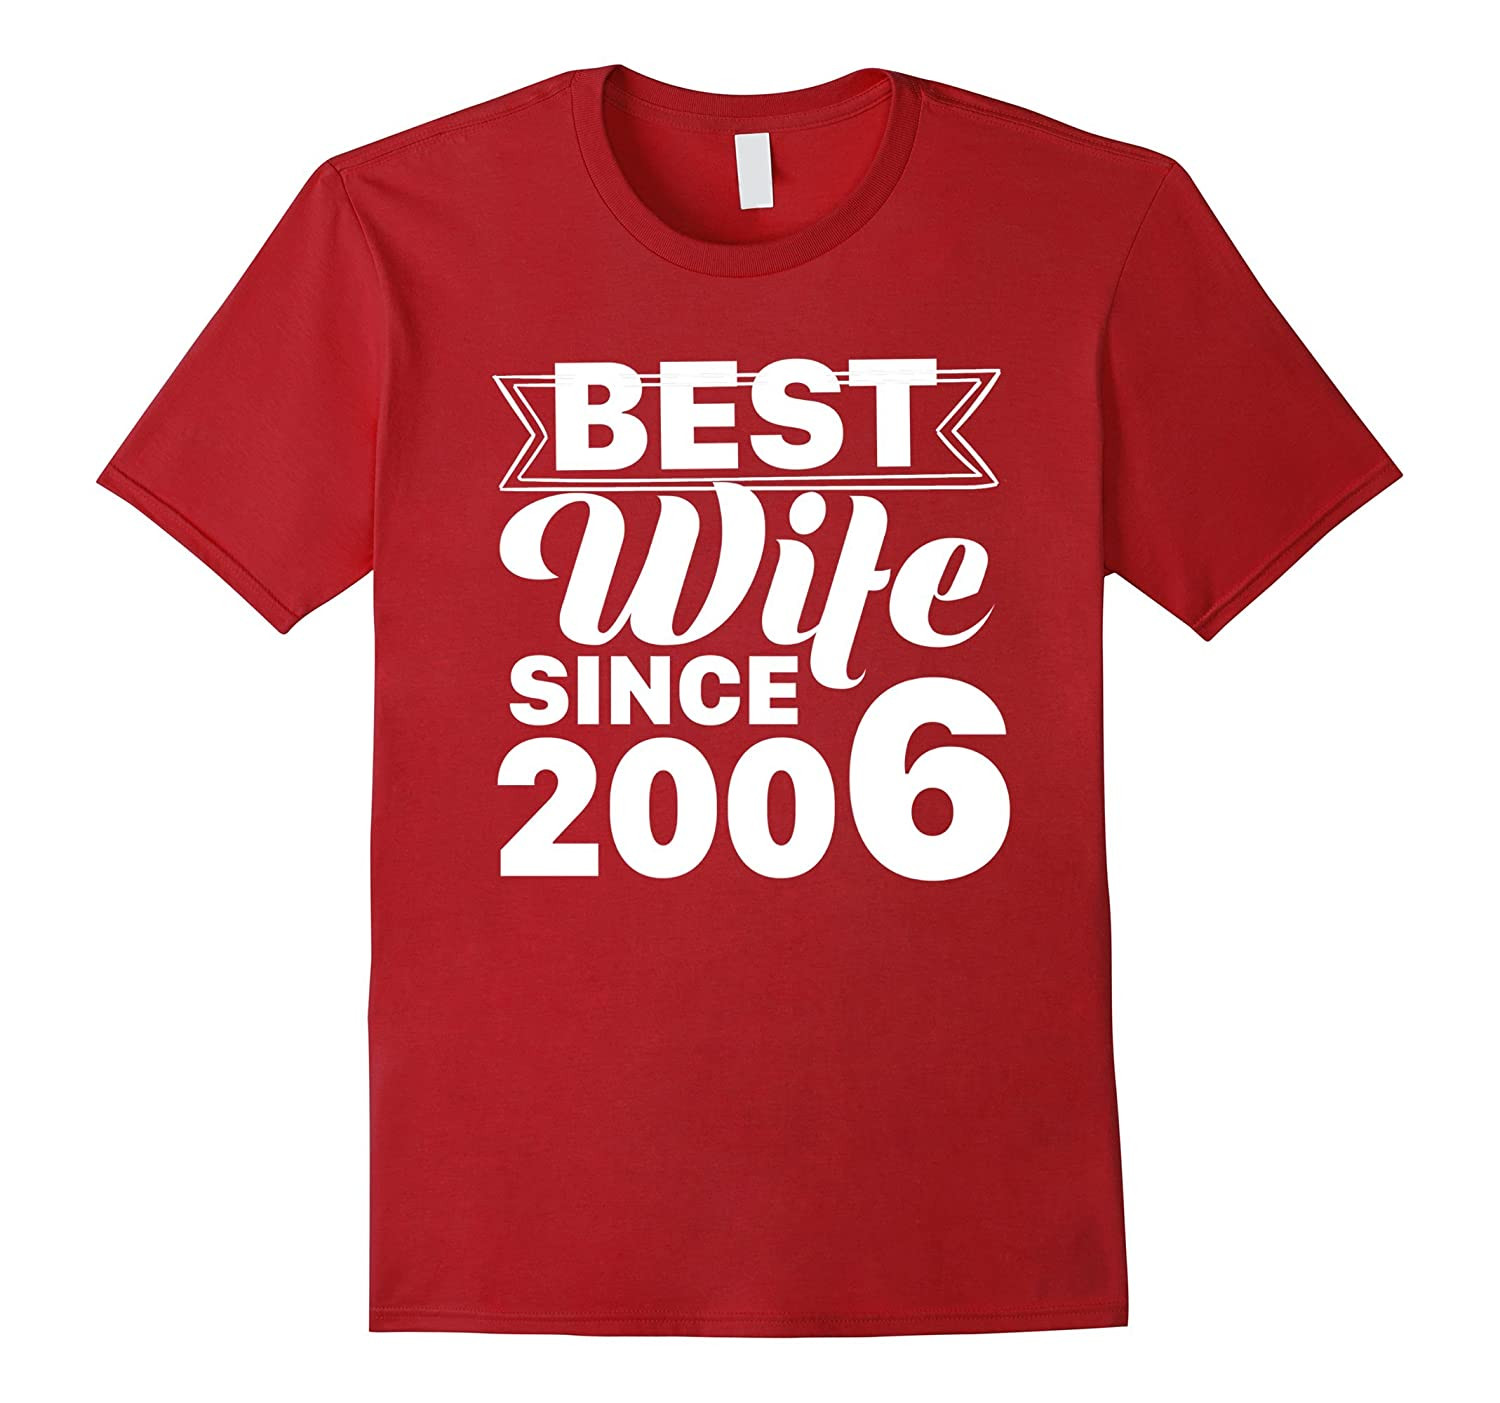 11Th Anniversary Gift Ideas For Her
 11th Wedding Anniversary Gift Ideas For Her Wife Since